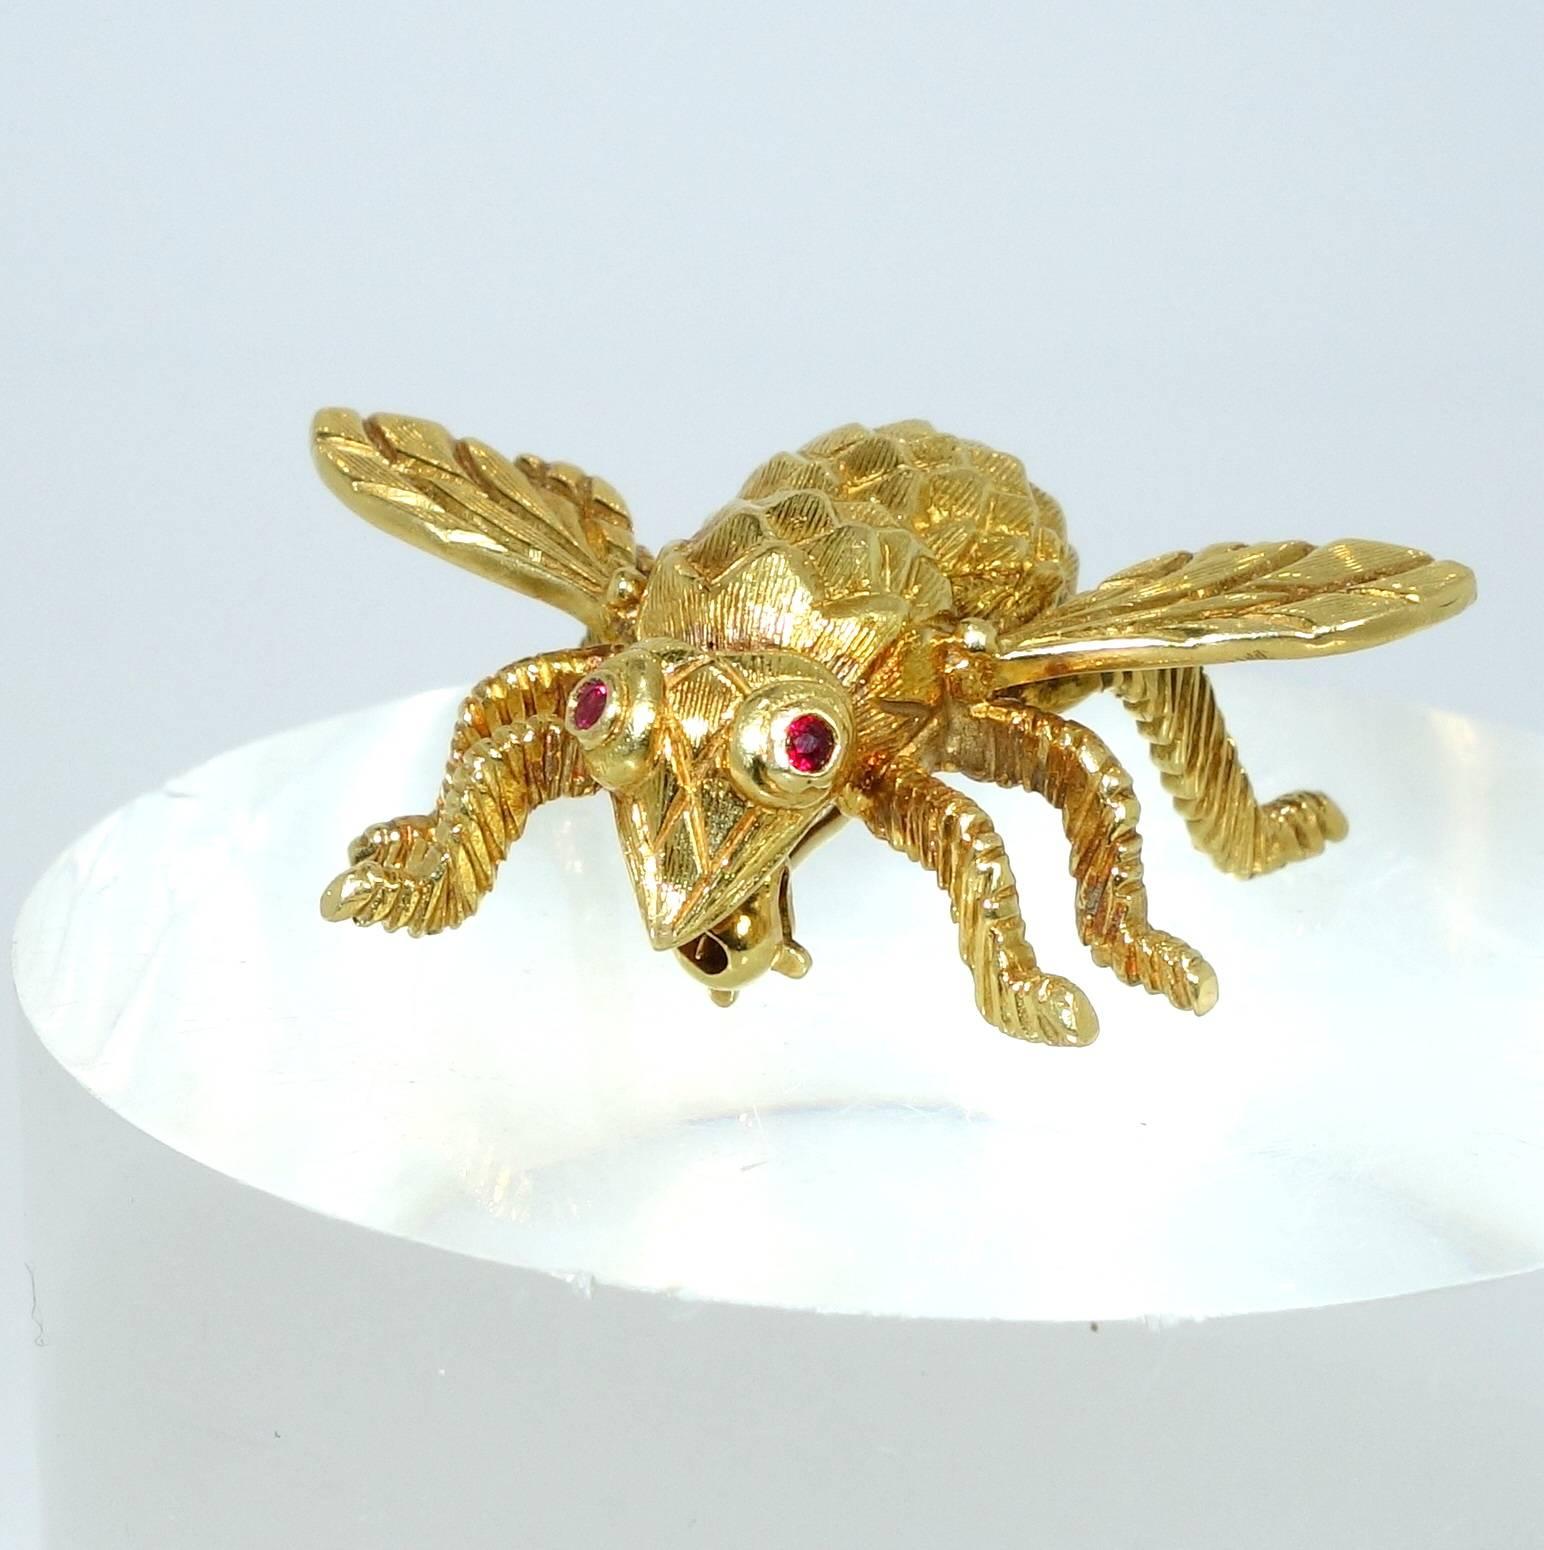 18K yellow gold with ruby eyes.  This little guy is one inch long and weighs 9.6 grams.